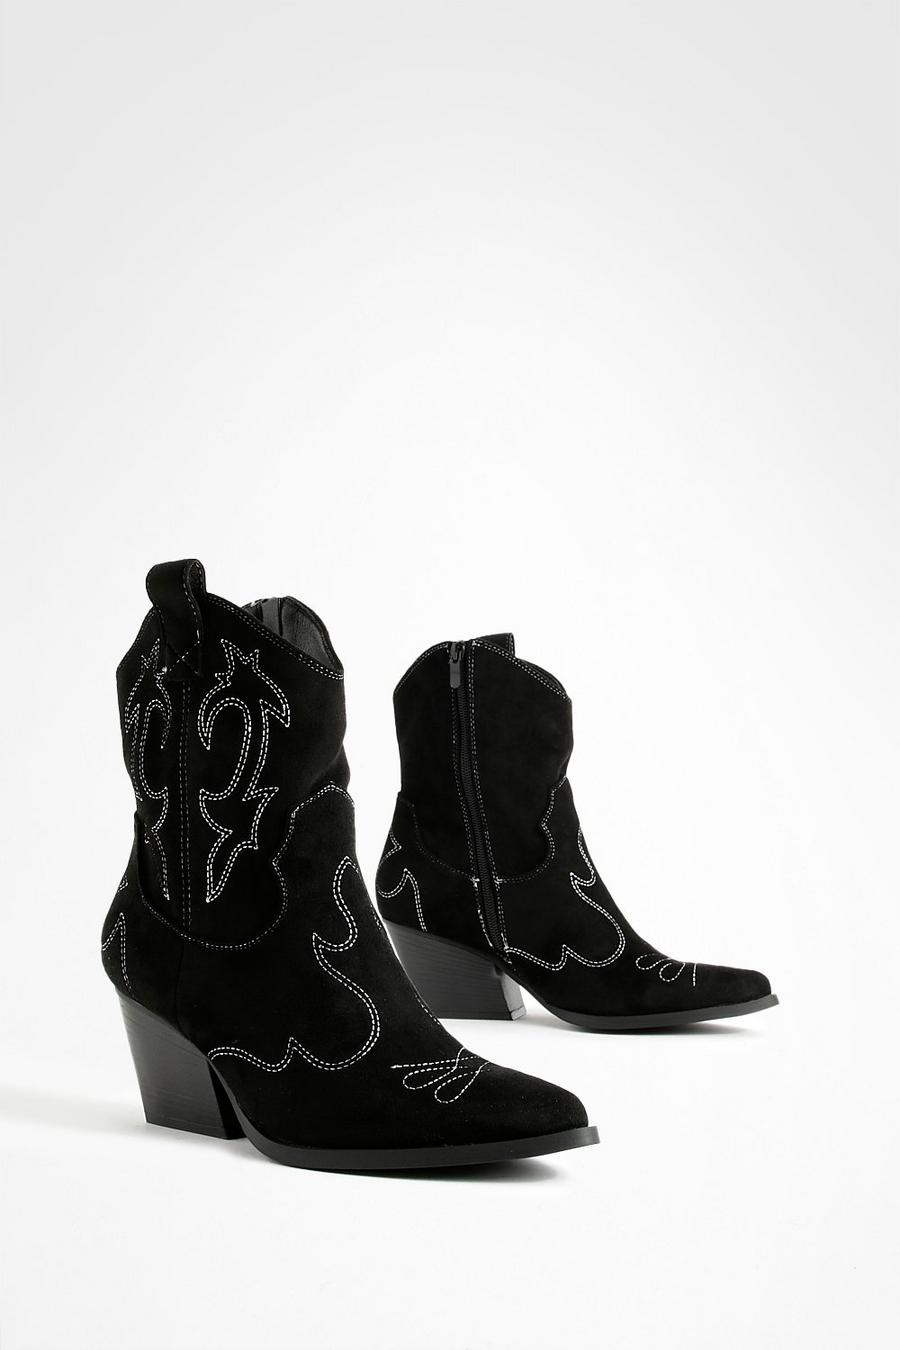 Black Stitch Detail Ankle Western Cowboy Boots image number 1